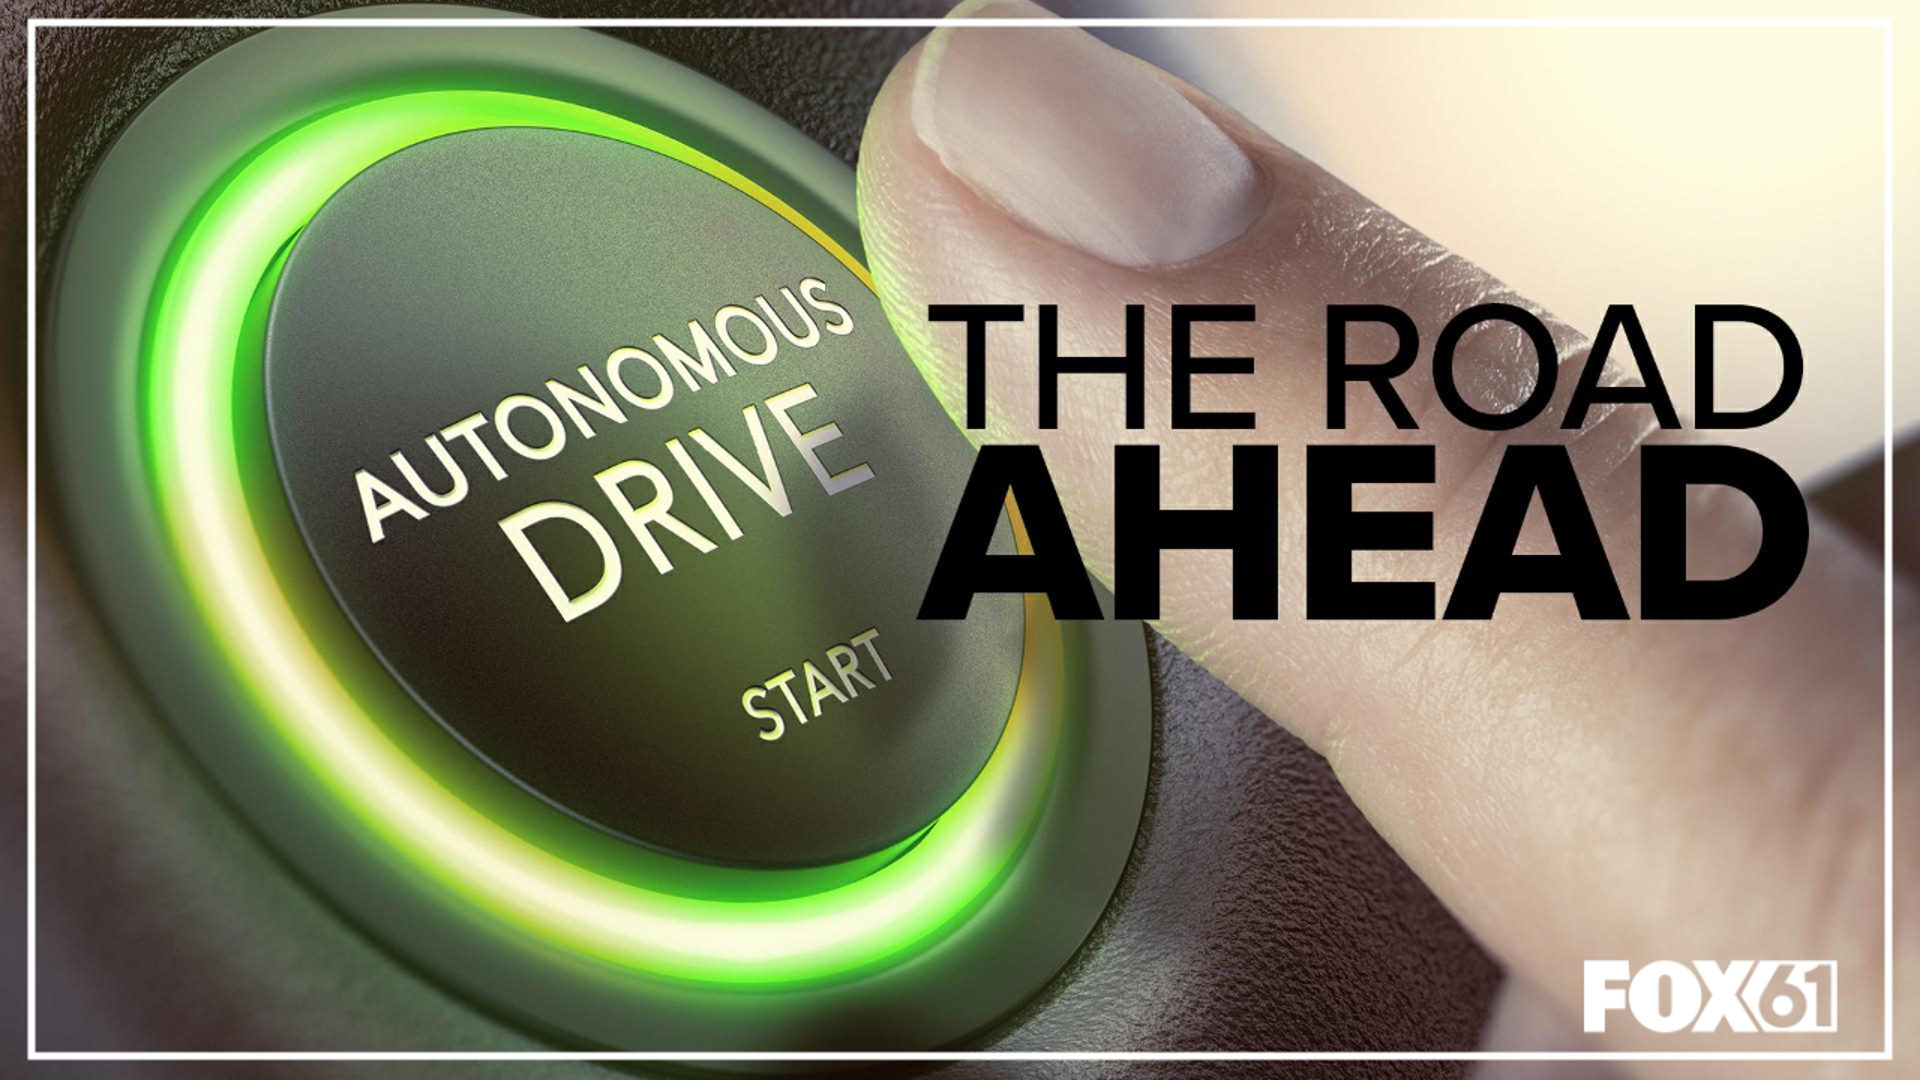 A Consumer Reports expert breaks down what vehicle automation means to the car buyer.